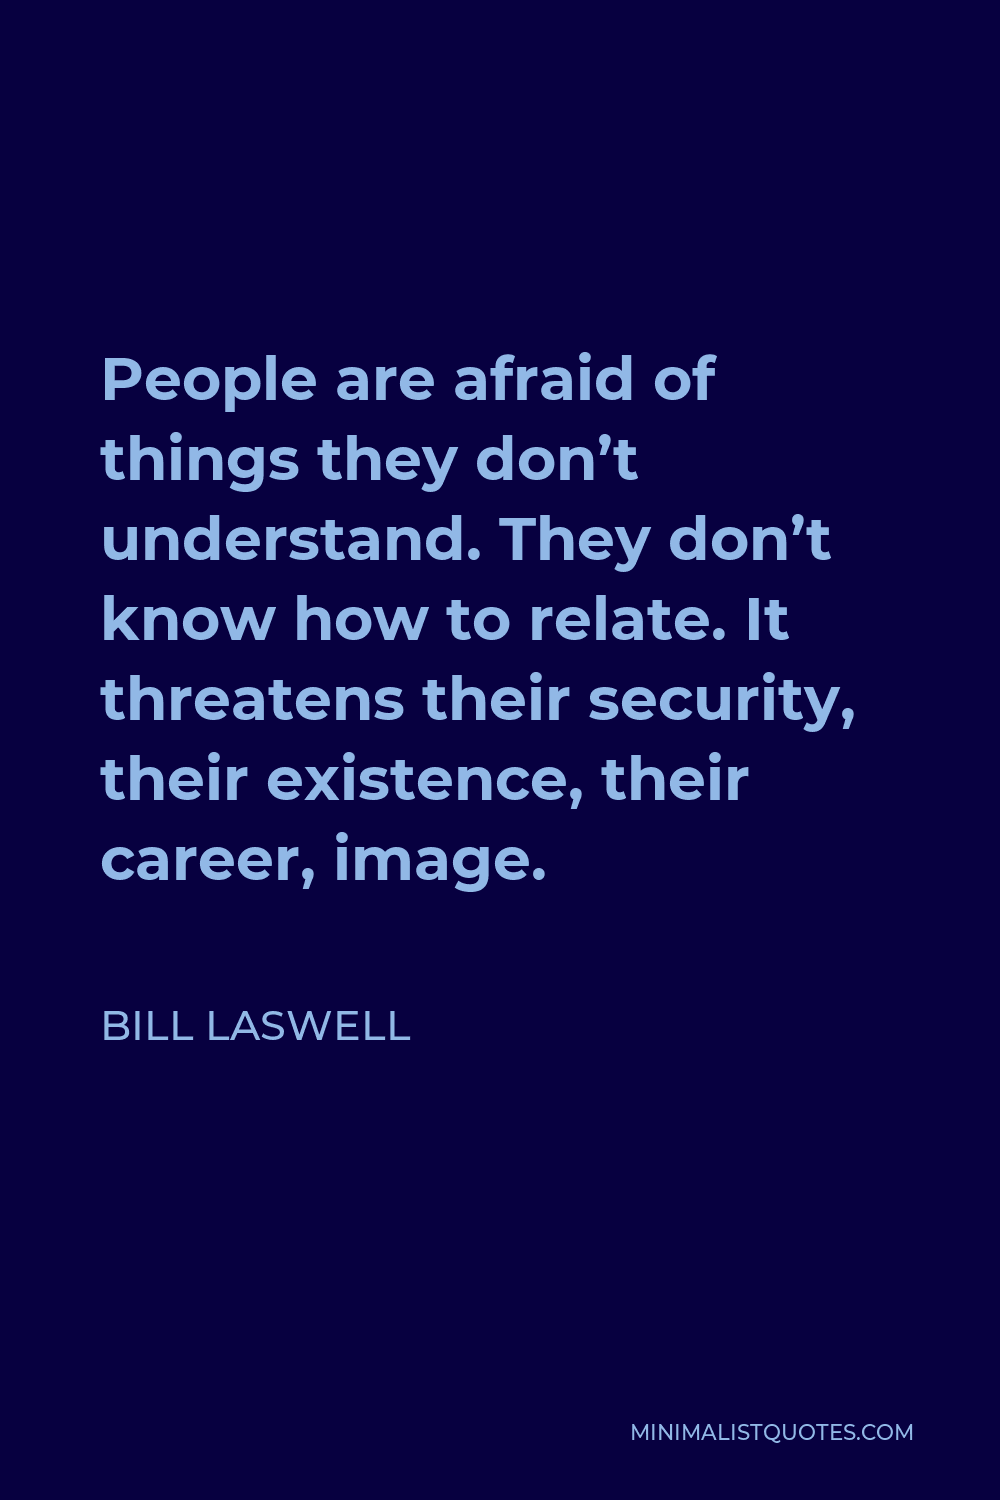 Bill Laswell Quote - People are afraid of things they don’t understand. They don’t know how to relate. It threatens their security, their existence, their career, image.